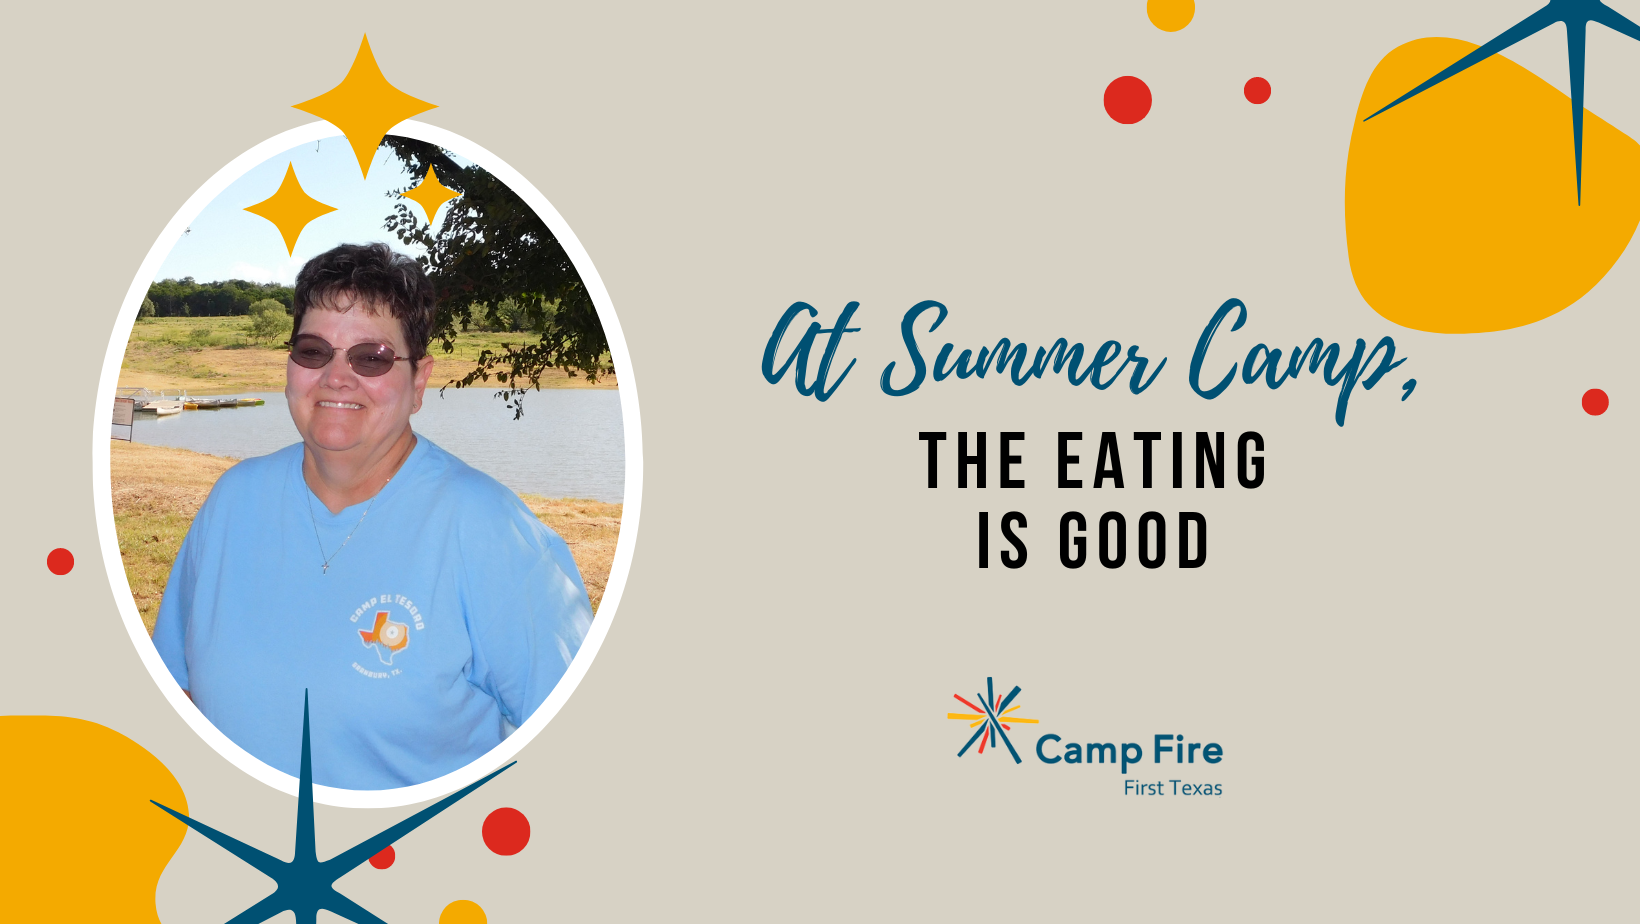 At Summer Camp, the Eating is Good, a Camp Fire First Texas blog by Dianne McKinley